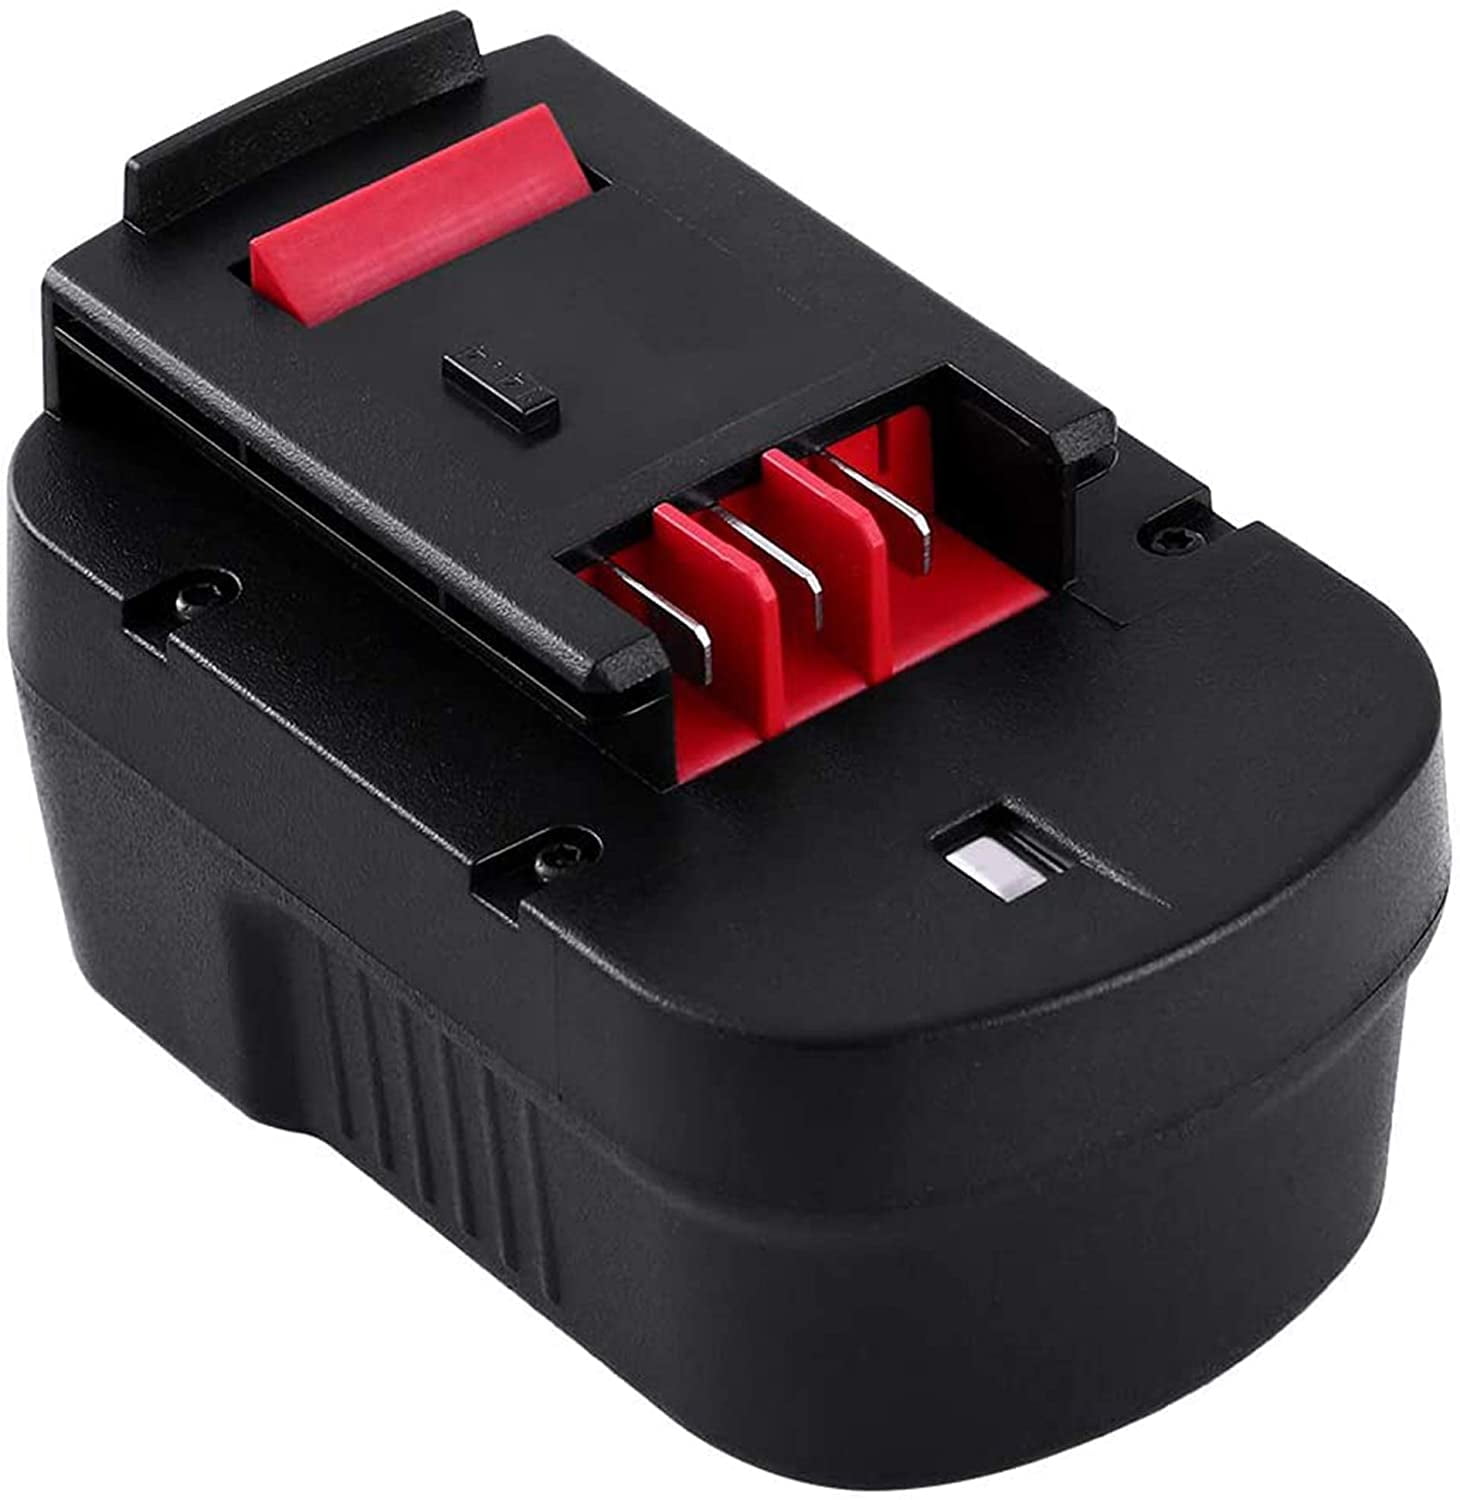 14.4V 6000mAh NI-MH Replacement Battery for Black & Decker HPB14